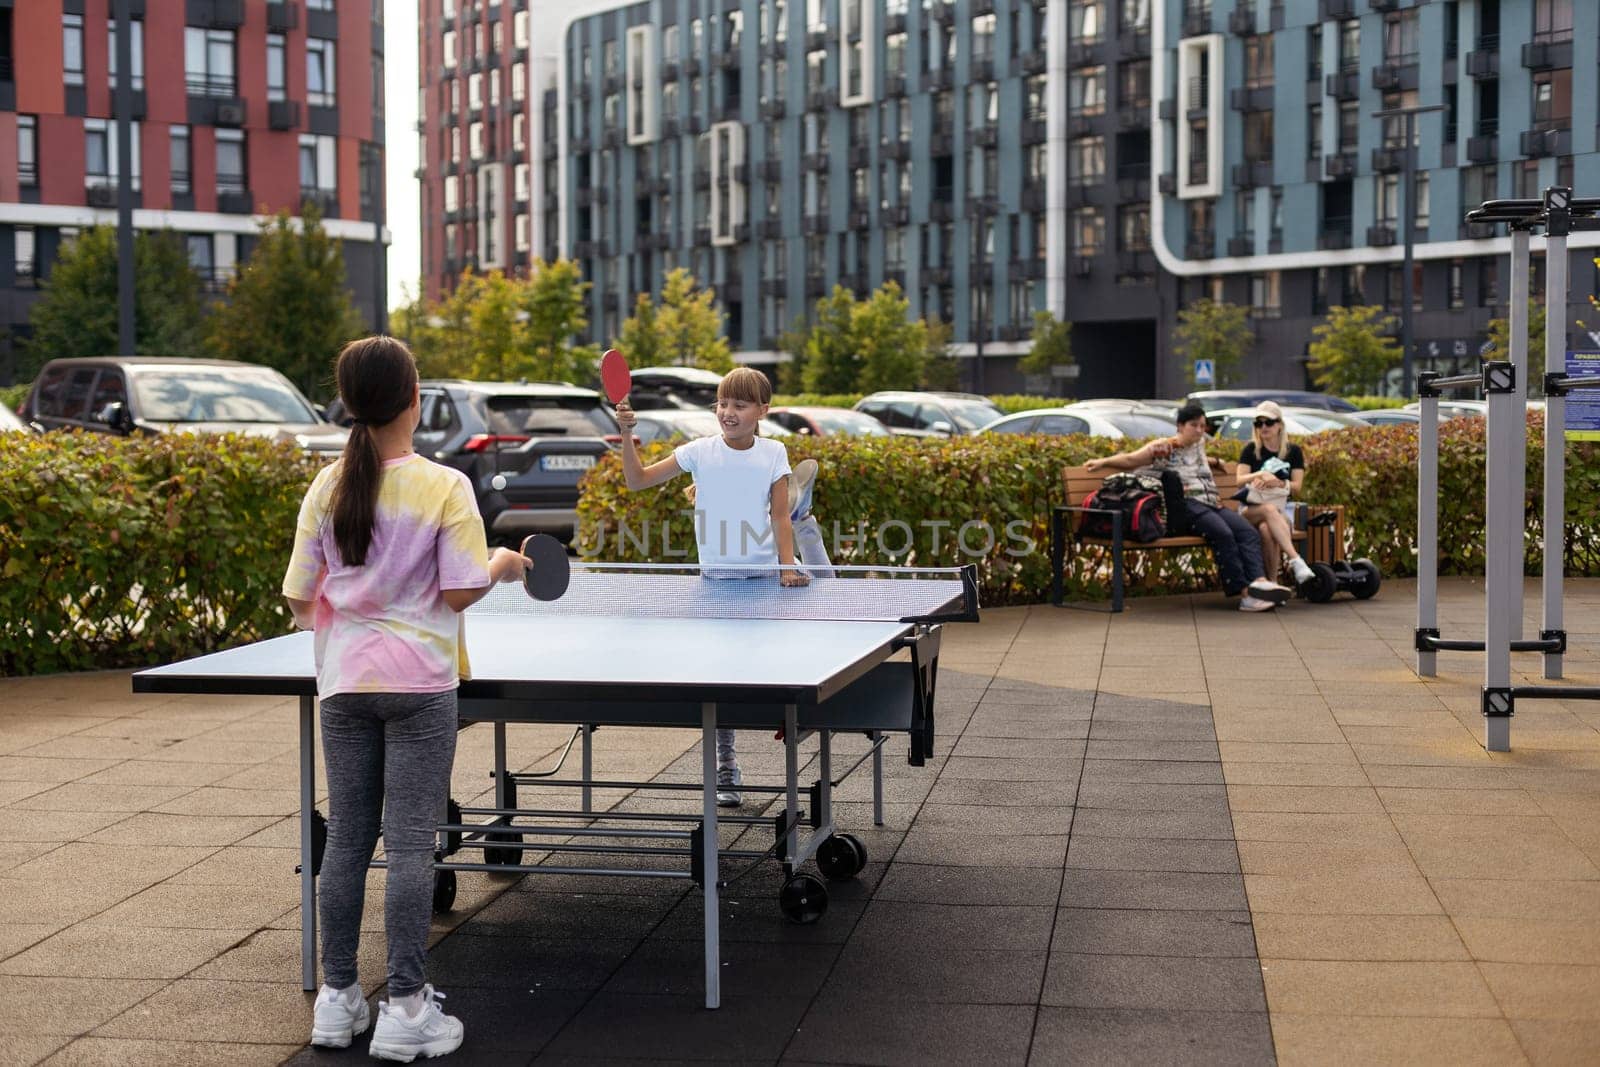 Kid playing table tennis outdoor with family. High quality photo